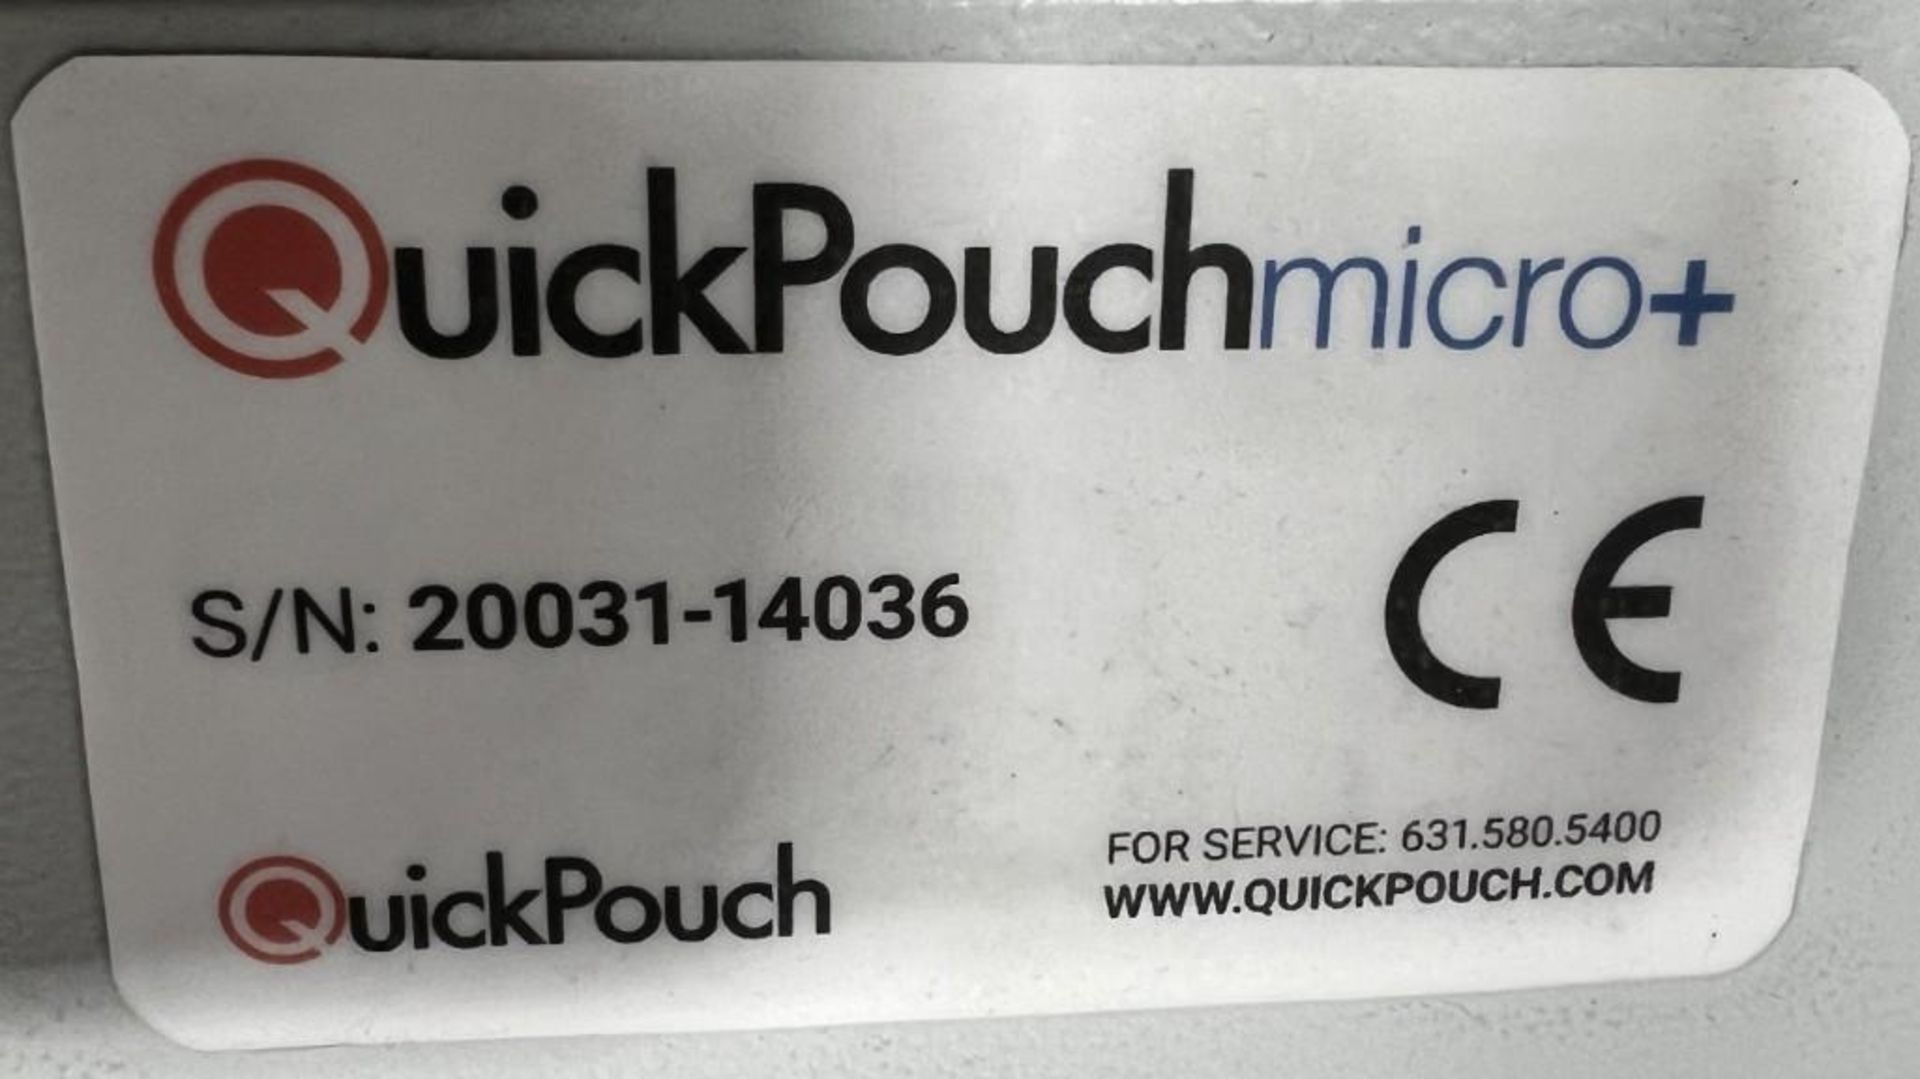 QuickPouch Micro+ Desktop Pouch Opener. Serial# 20031-14036. - Image 6 of 6